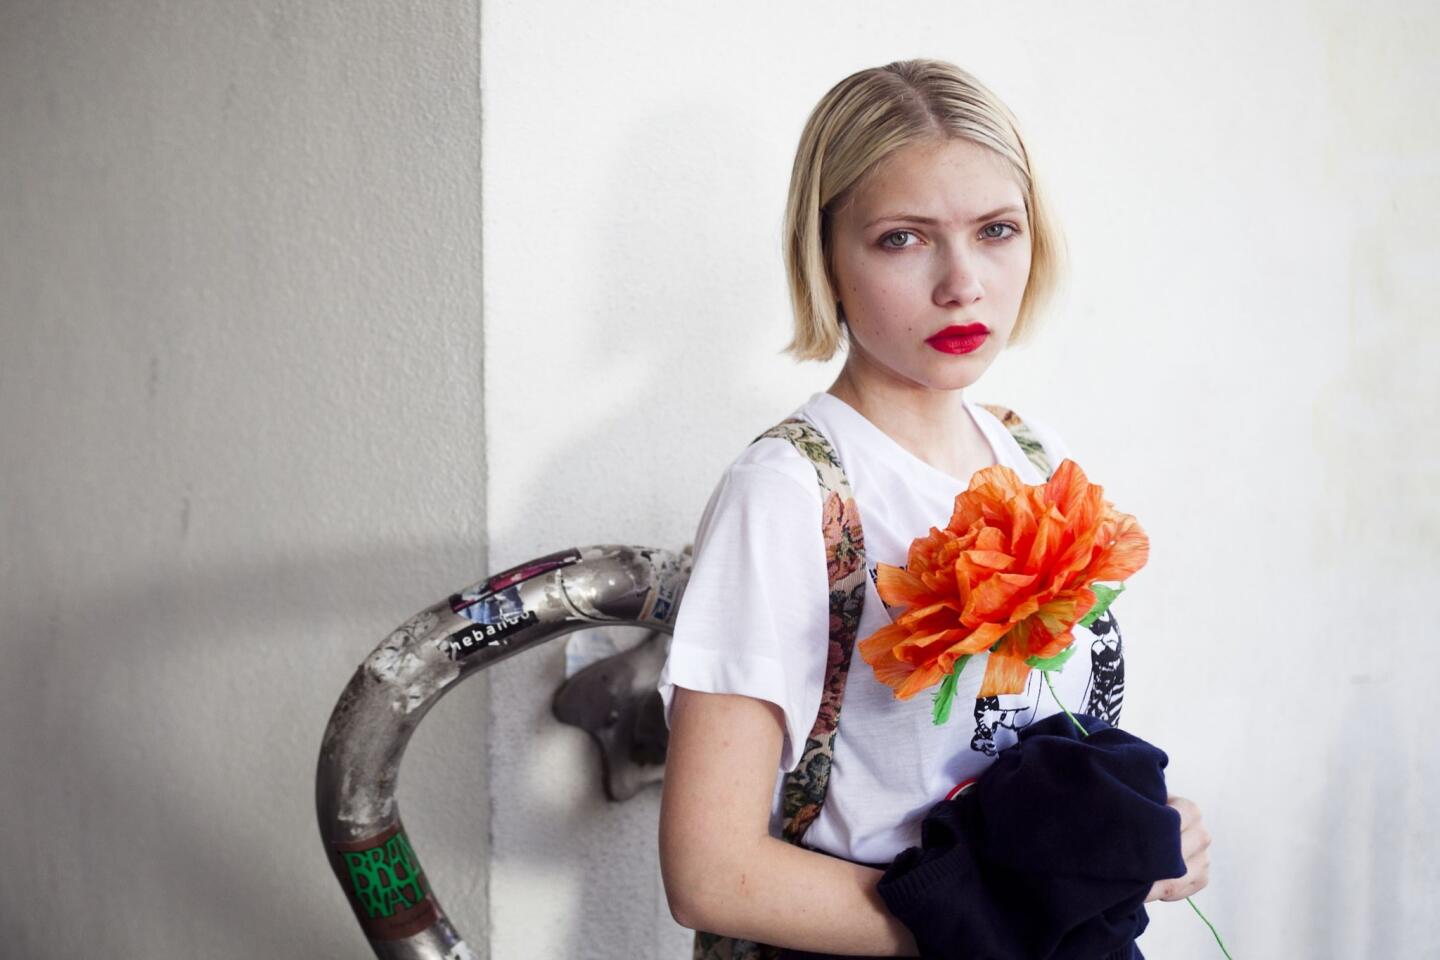 Tastemaker and teen blogger sensation Tavi Gevinson, 17, has the attention of a generation of young readers and the media with her online pop culture magazine, Rookie.